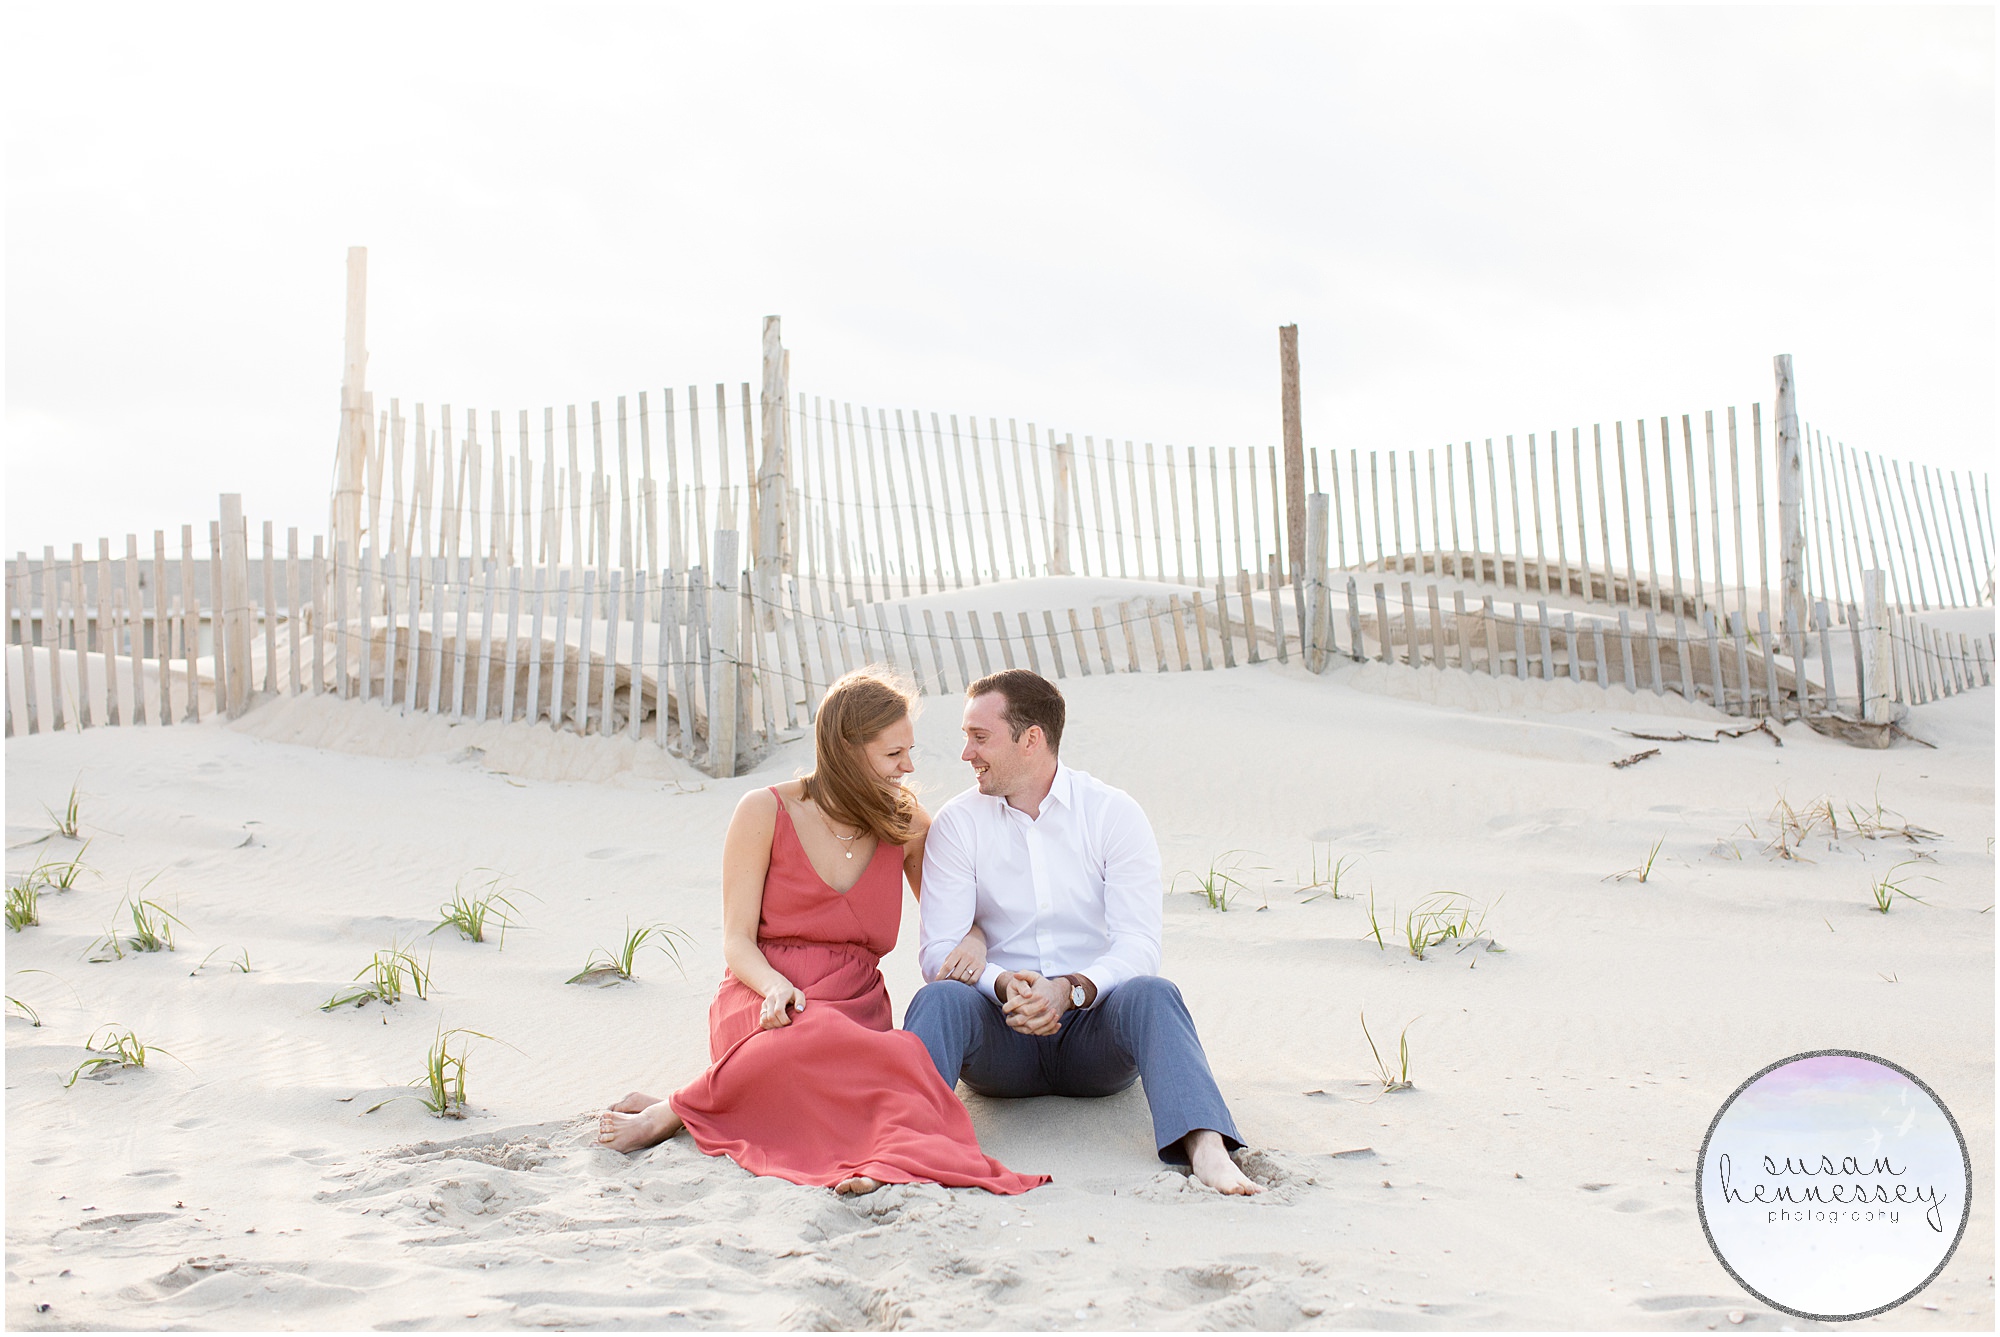 An LBI engagement session